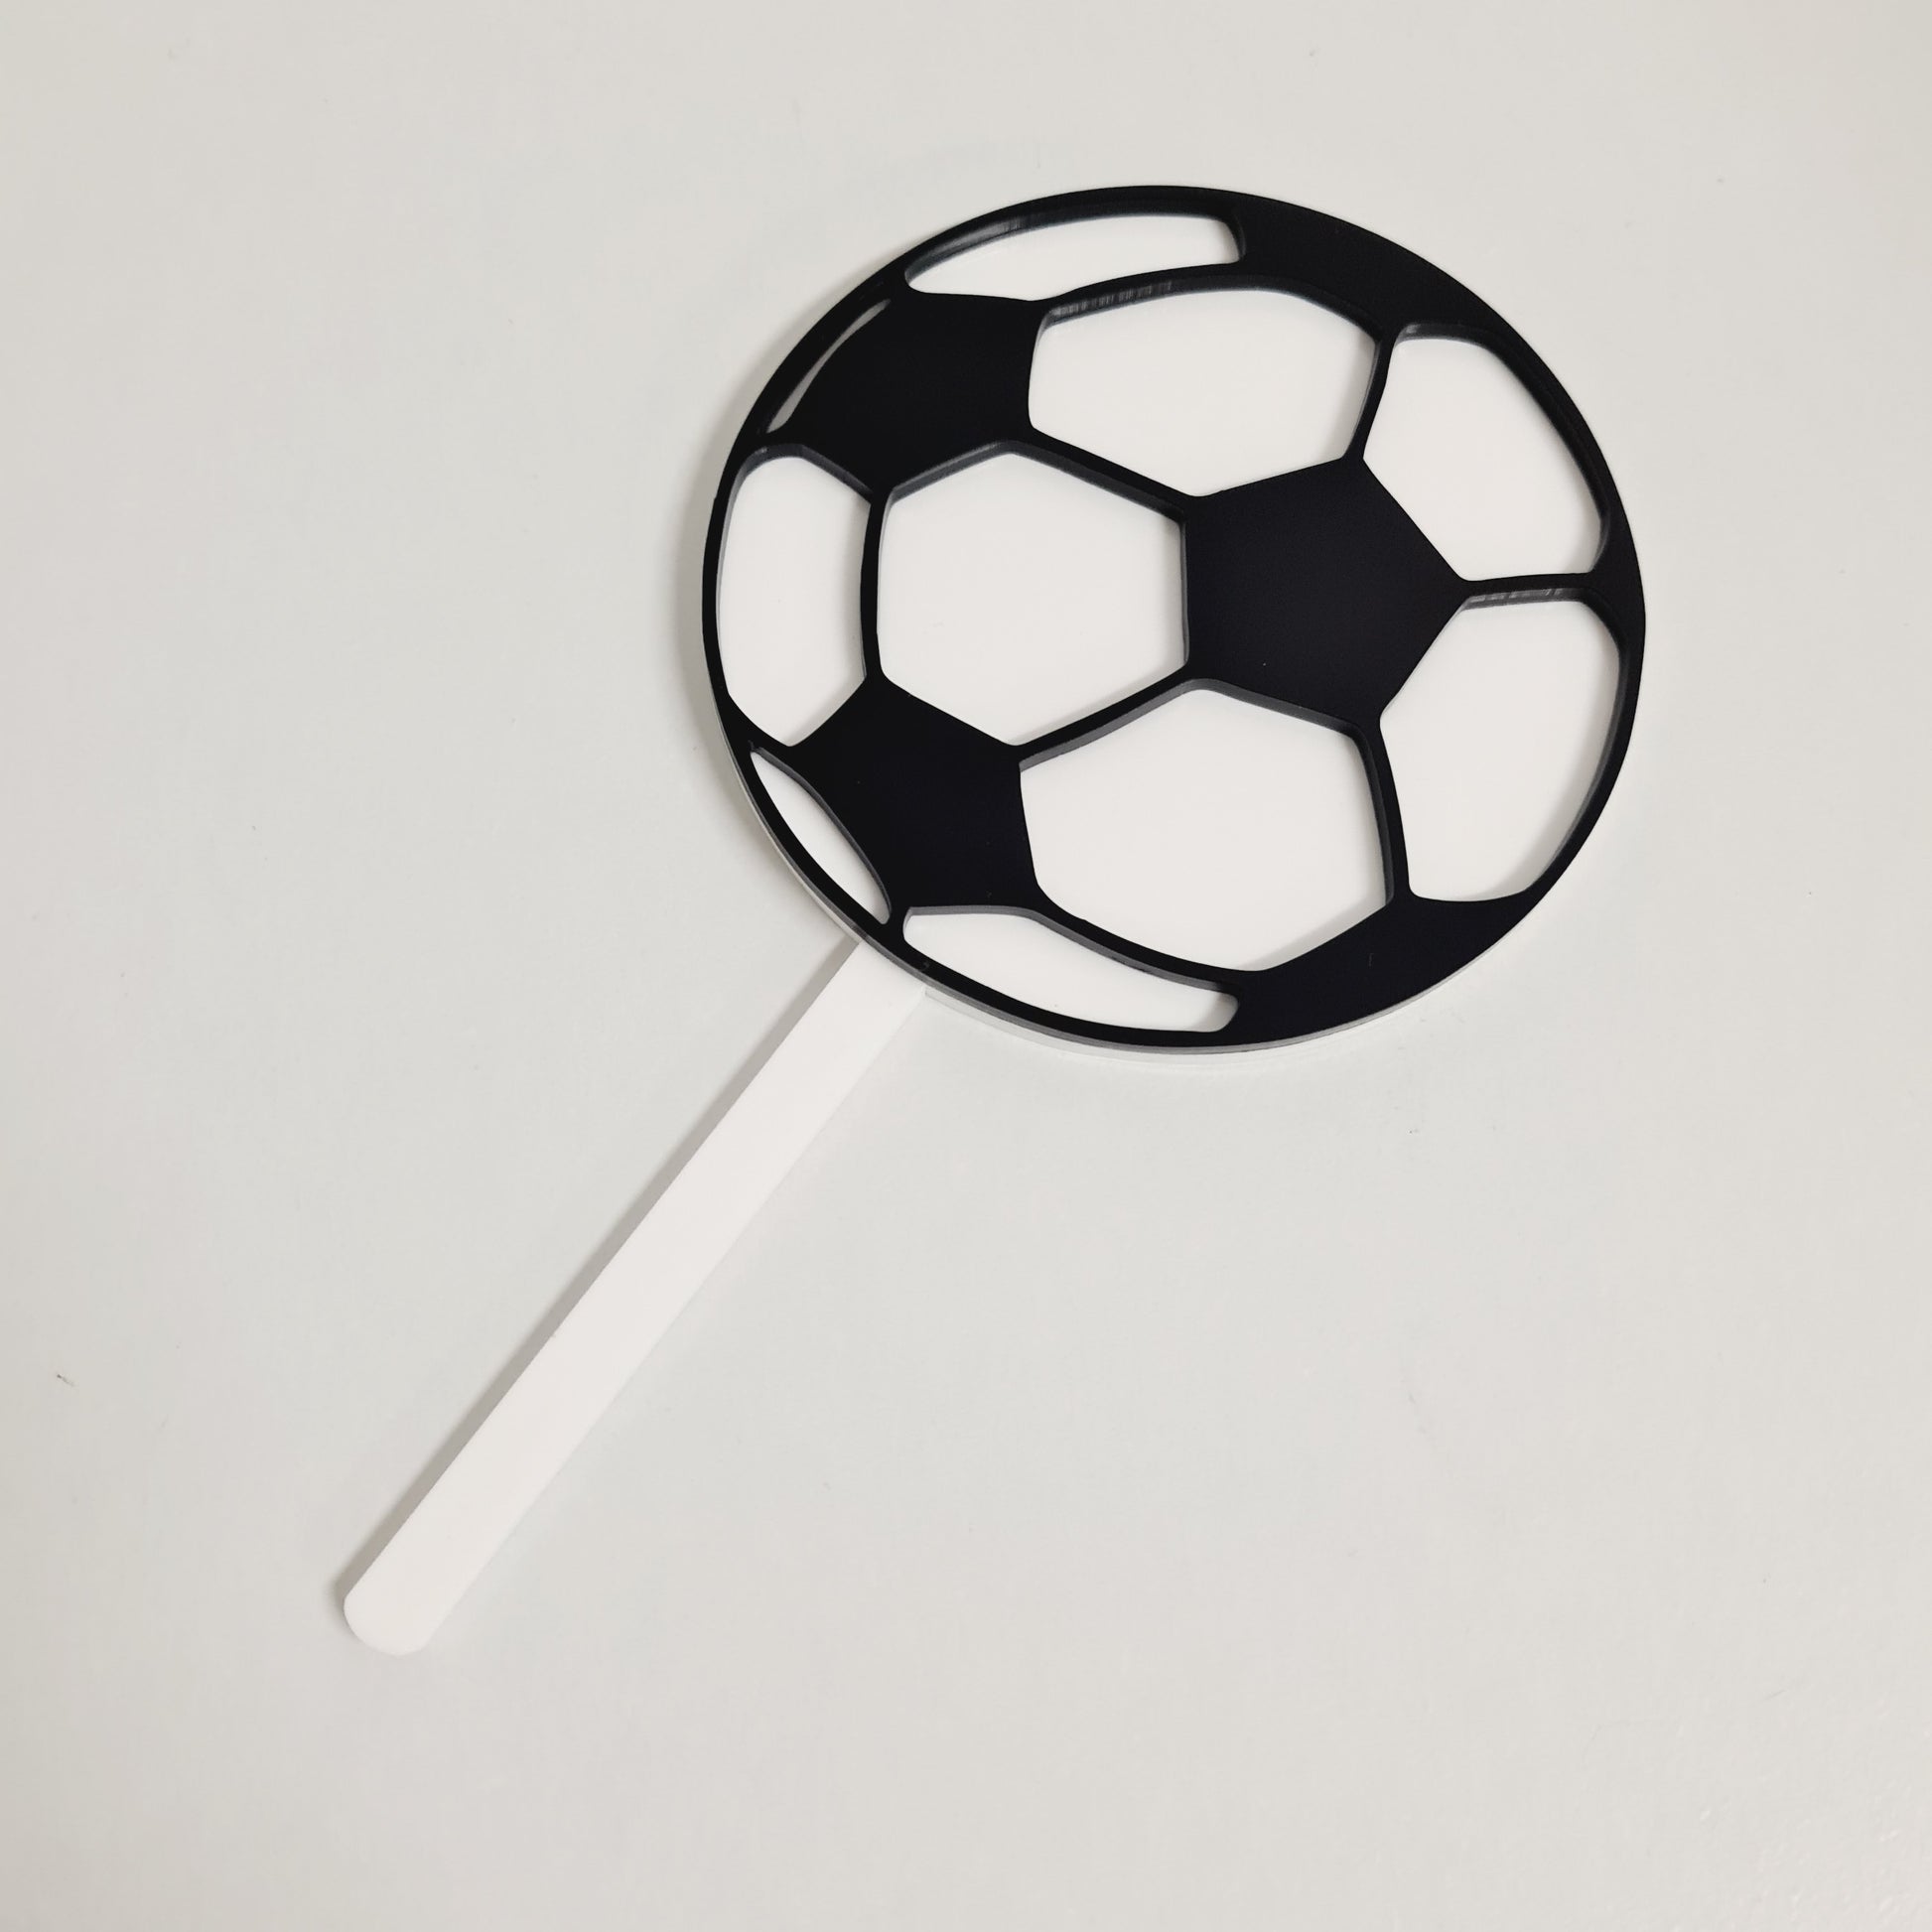 EDIBLE Soccer Ball Cake Topper Birthday Party Wafer Paper / icing | eBay